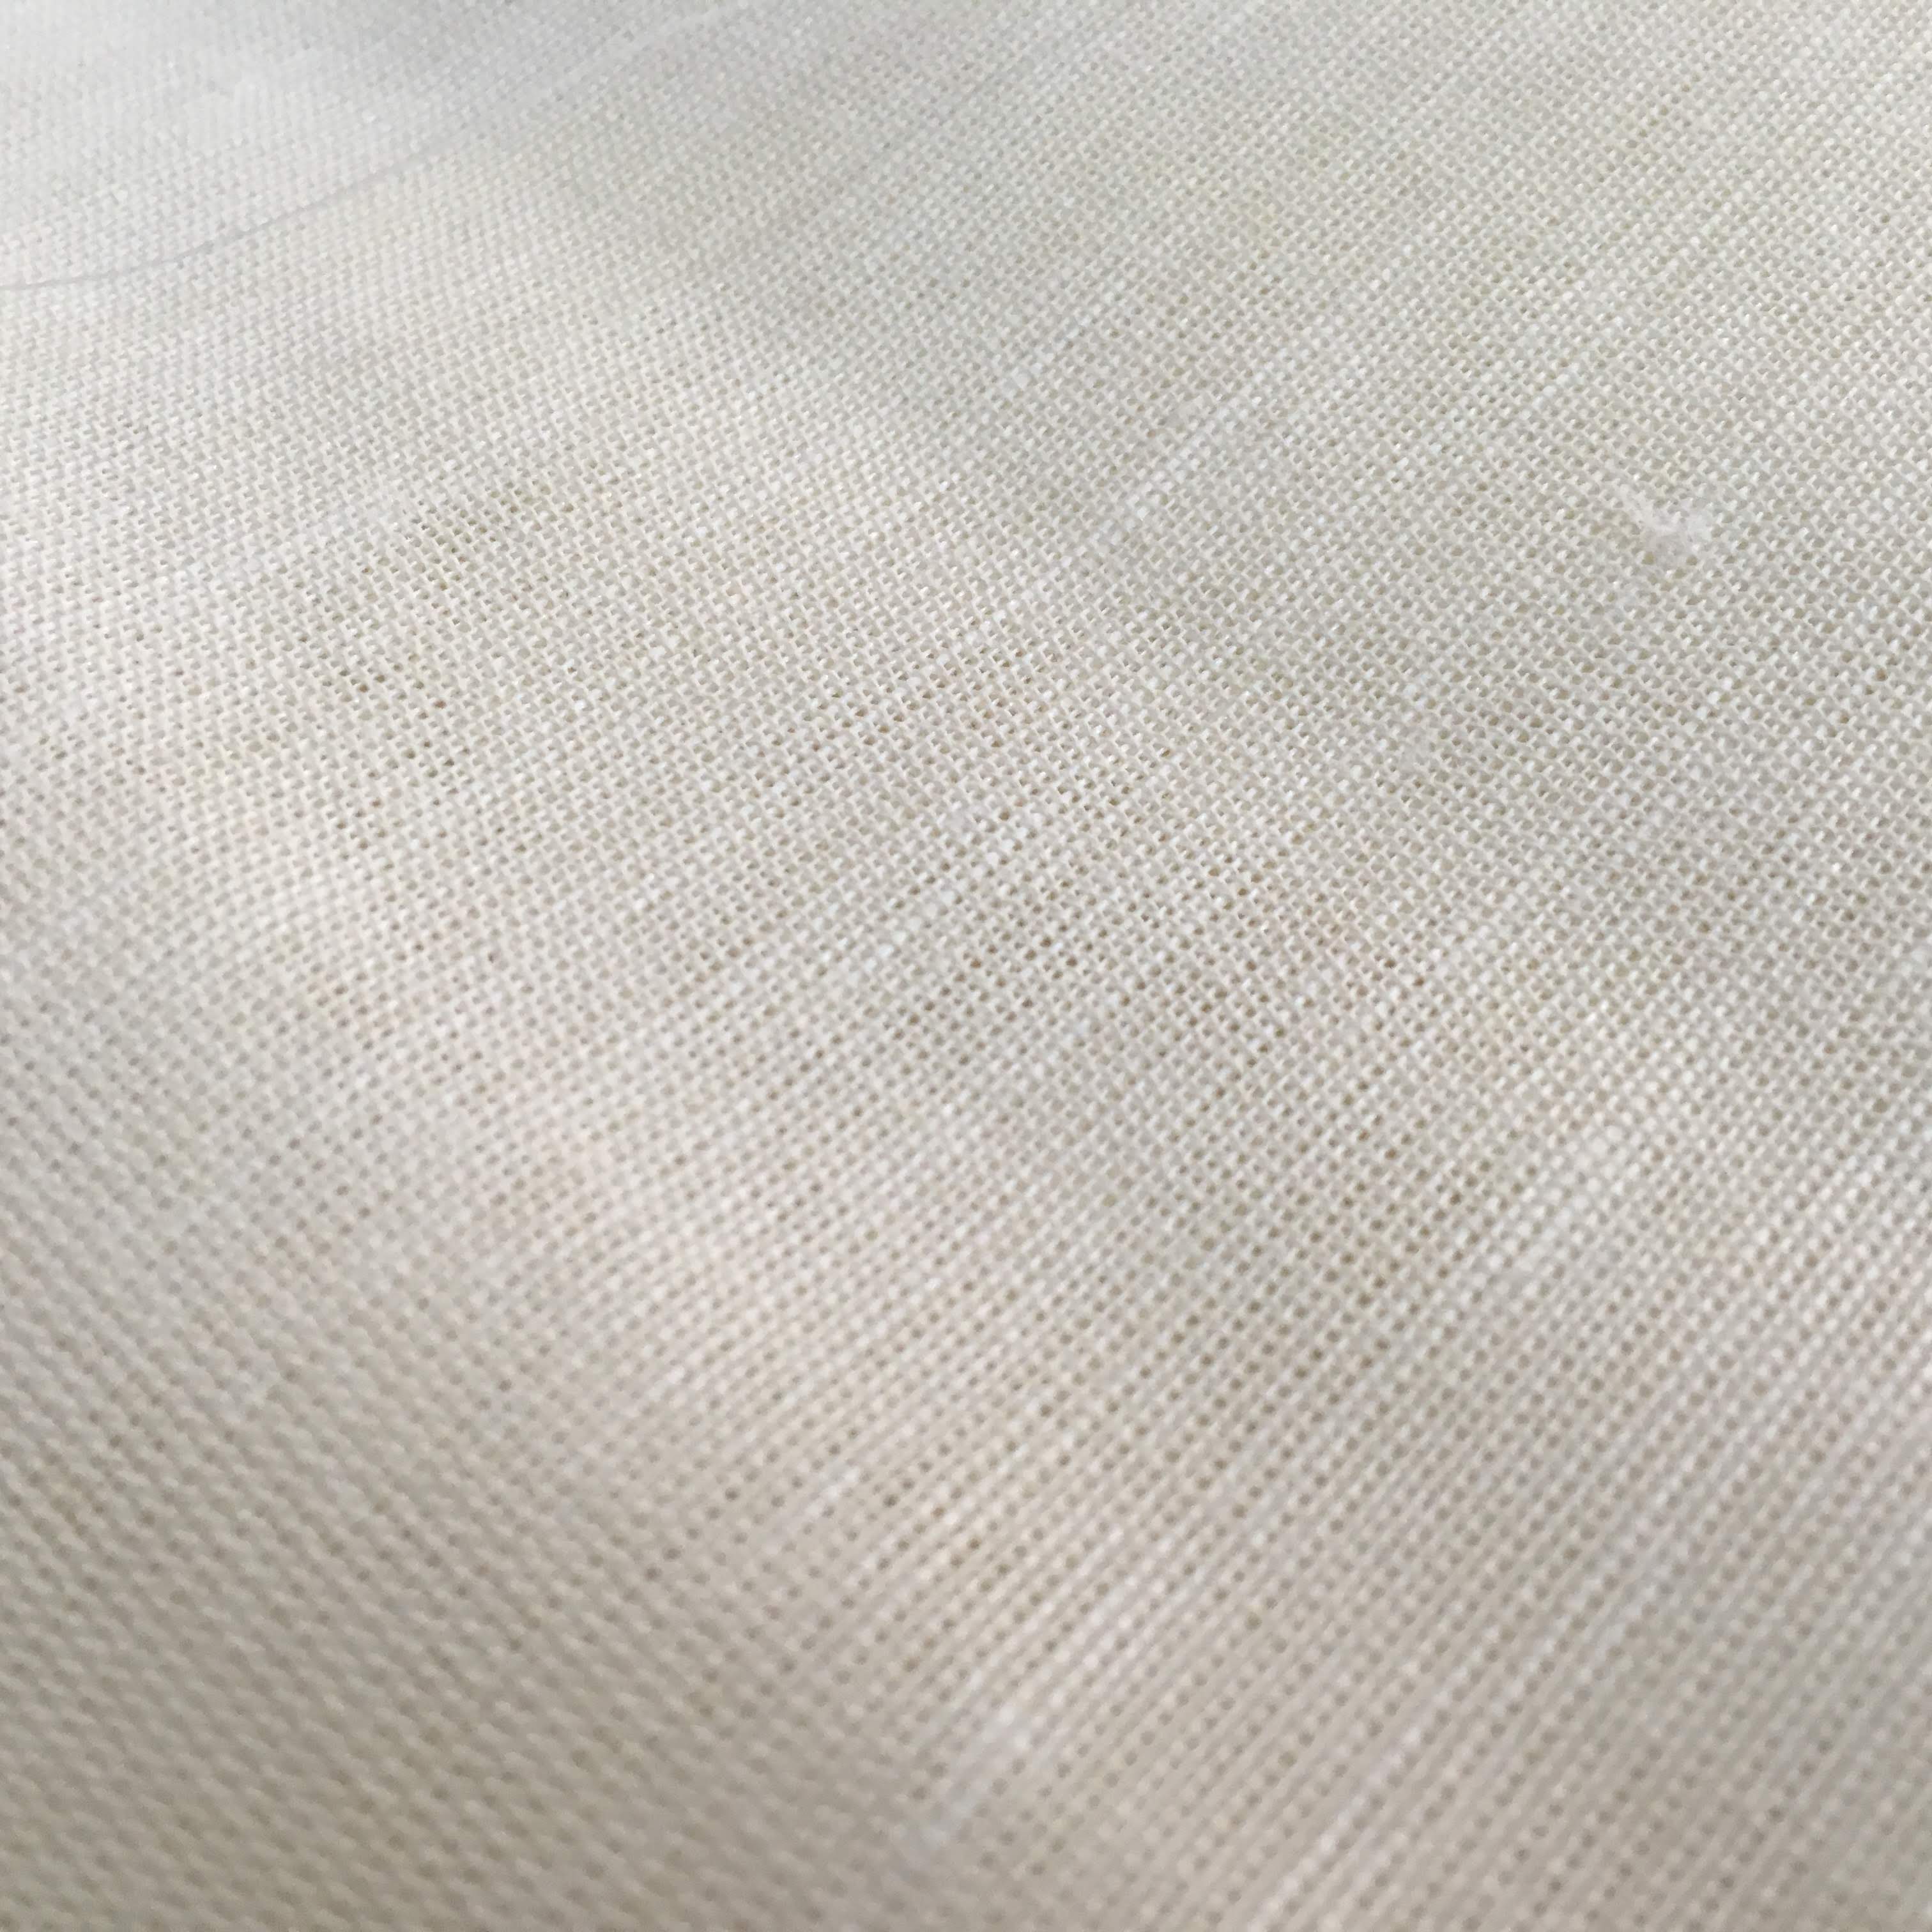 Solid Color Off White Linen Fabric By Yard, Upholstery Linen Fabric ...